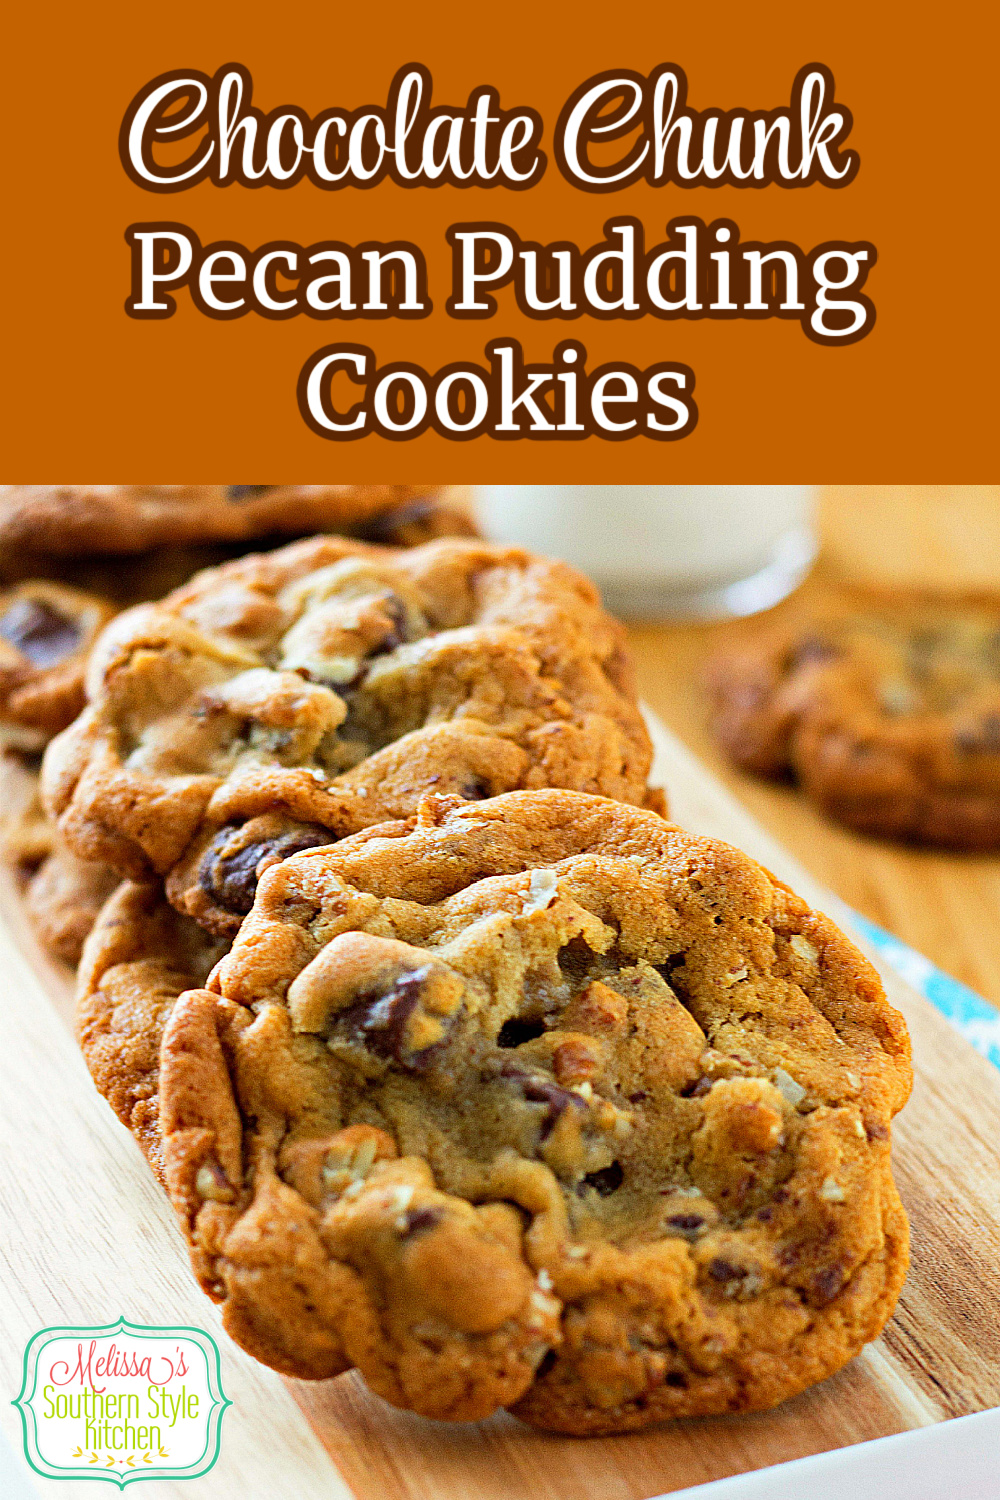 These Chocolate Chunk Pecan Pudding Cookies won't last long in your cookie jar #chocolatechunkcookies #puddingcookies #pecans #cookierecipes #easucookierecipes #chocolate #Christmascookies #chocolatecookies #southernrecipes